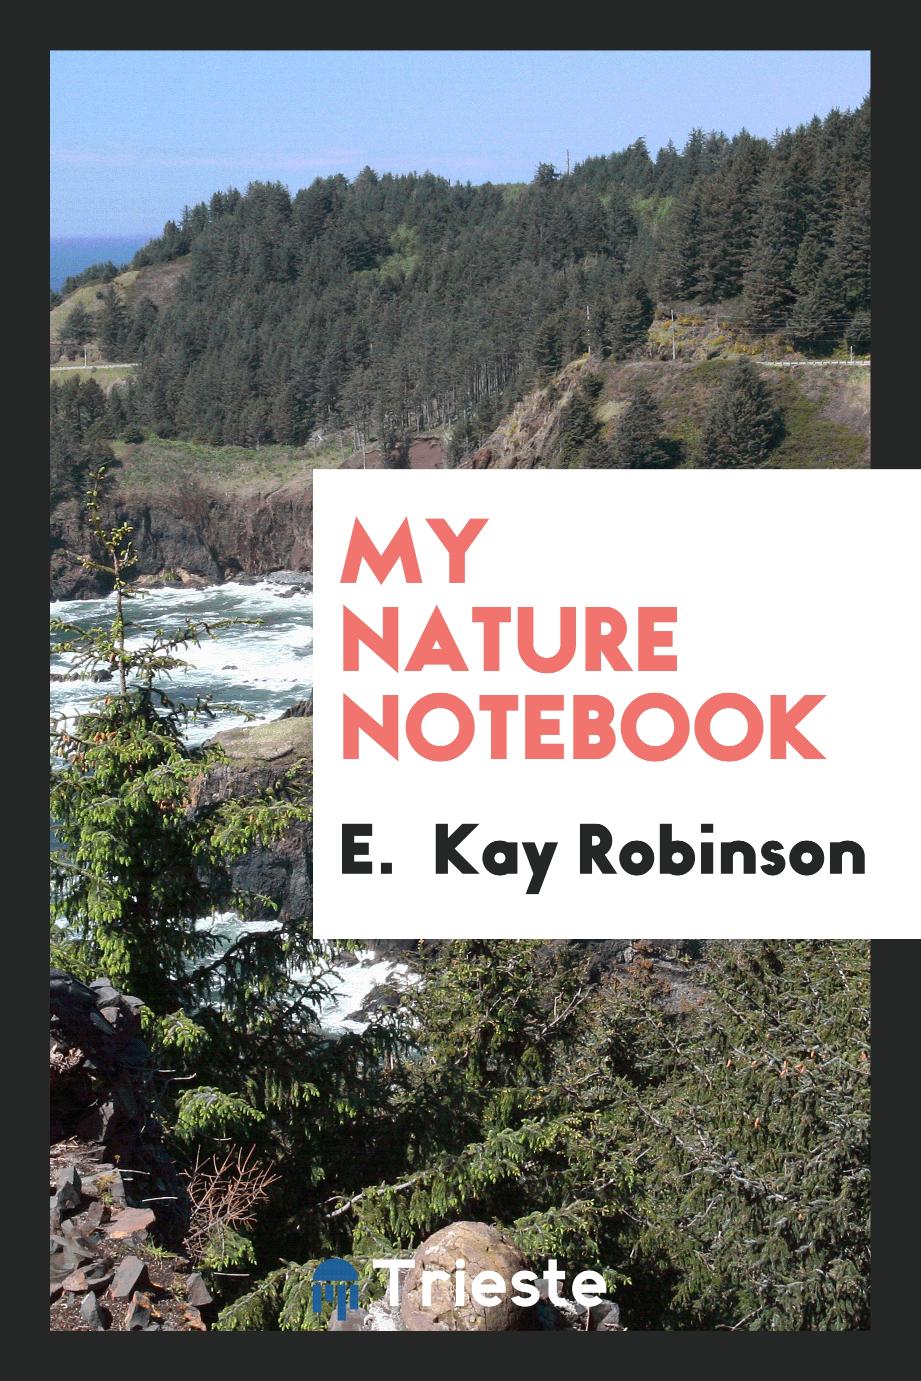 My nature notebook